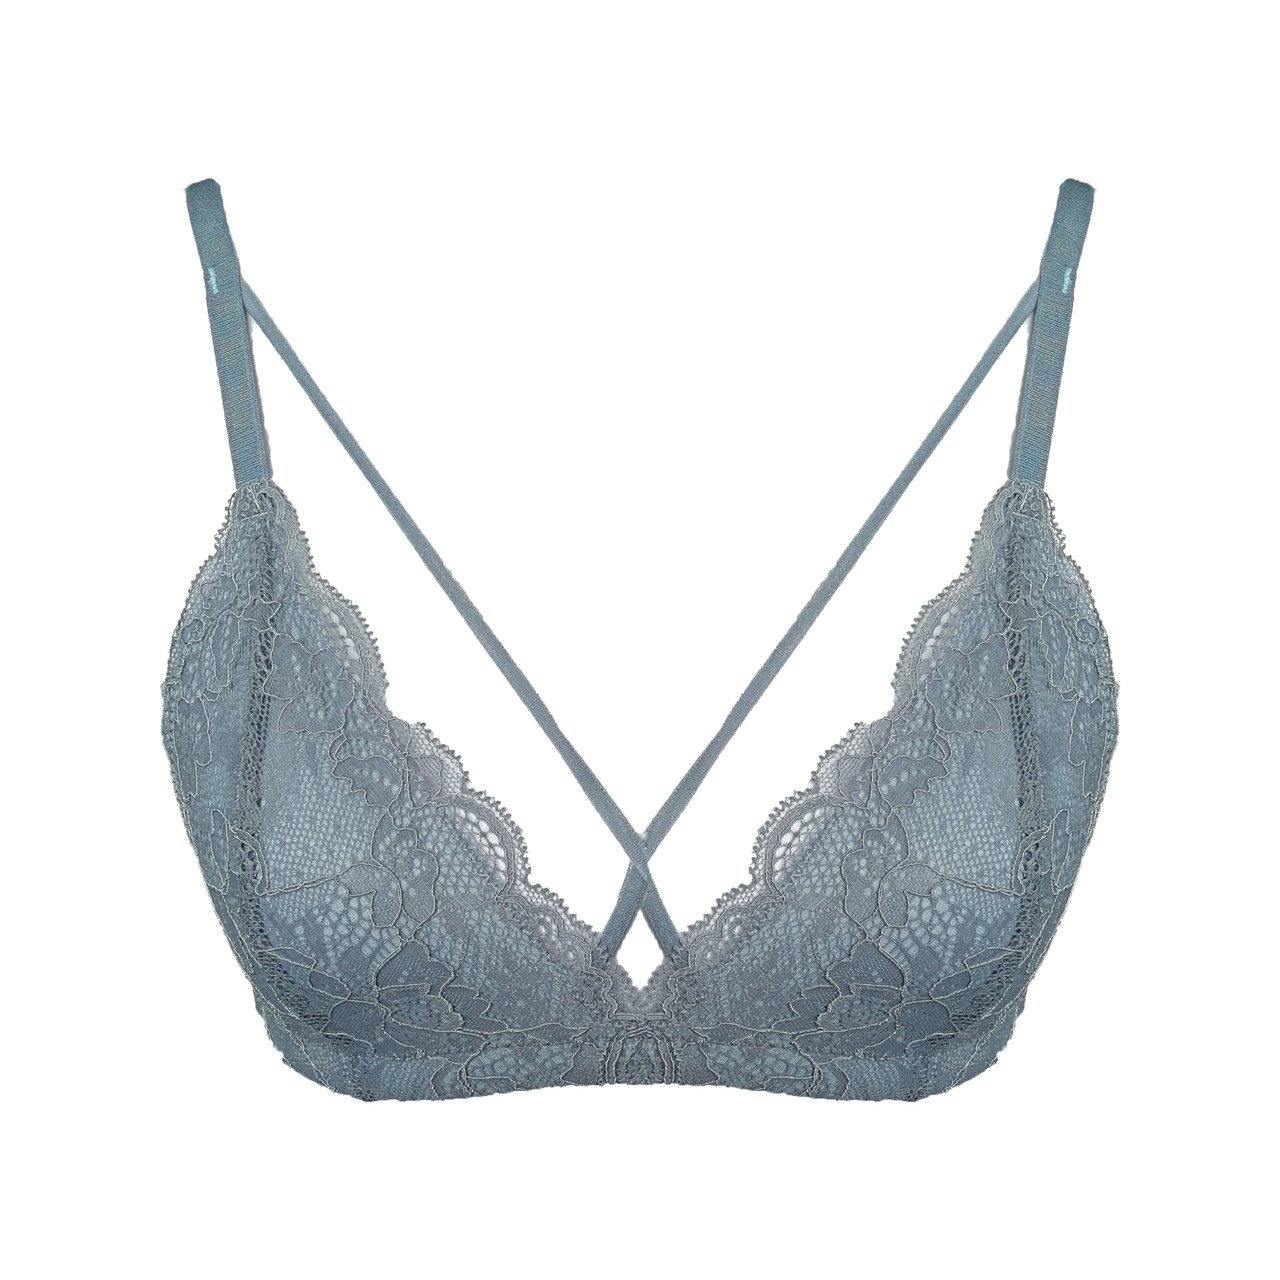 obclassic strappy unpadded bralette - Our Bralette Club